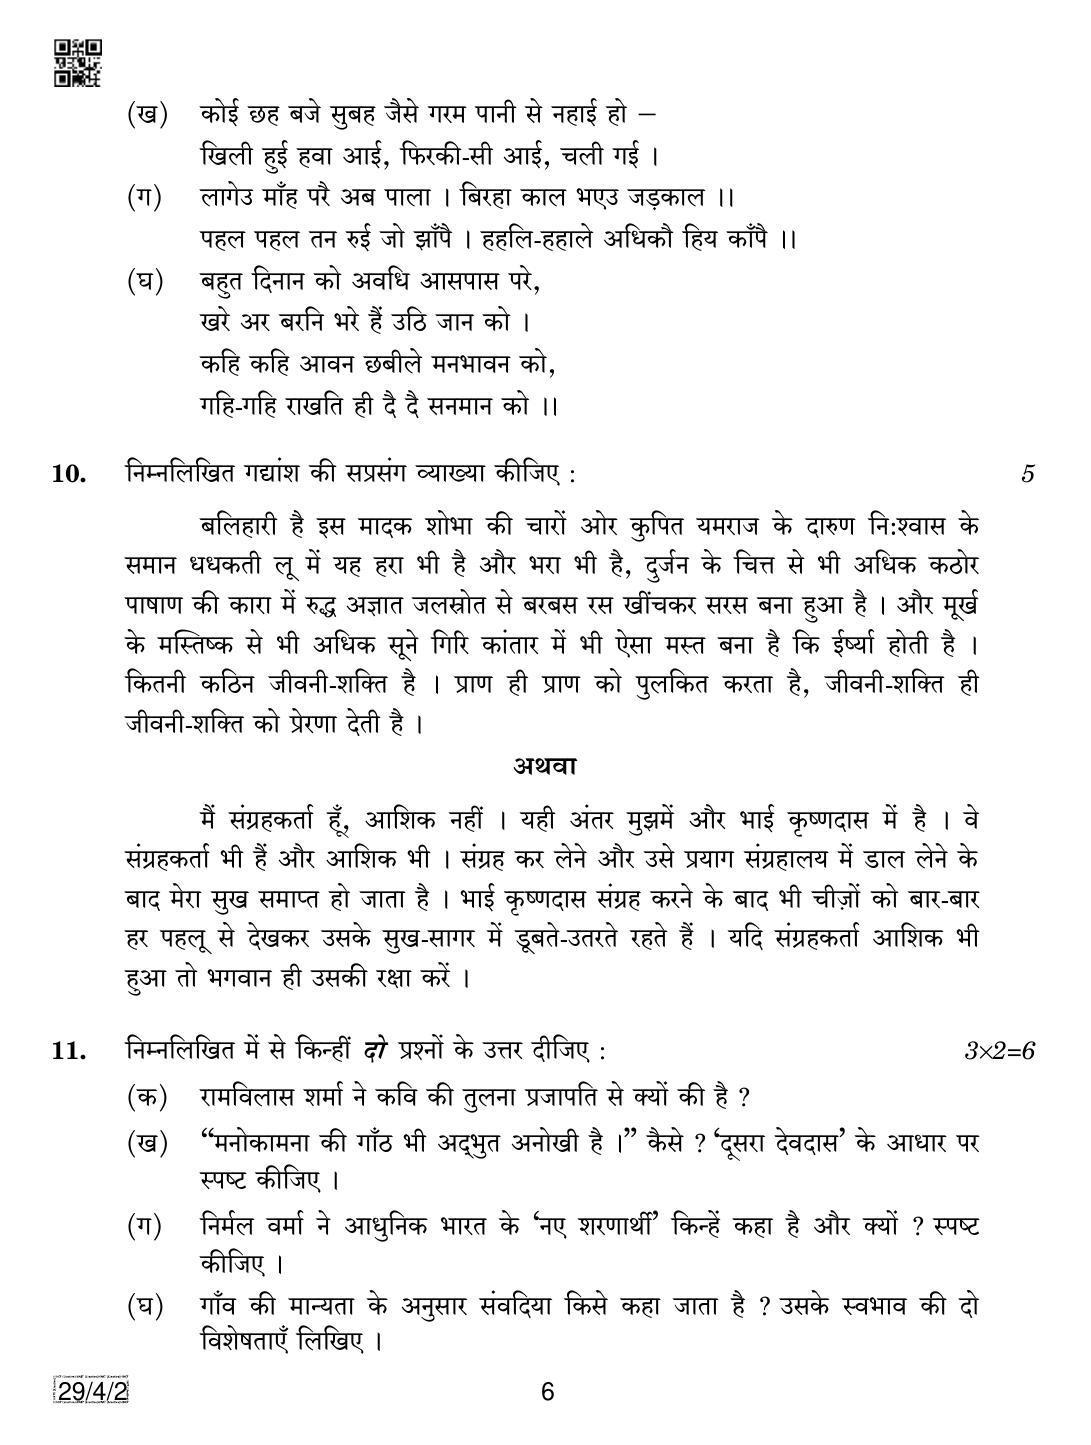 CBSE Class 12 29-4-2 Hindi Elective 2019 Question Paper - Page 6